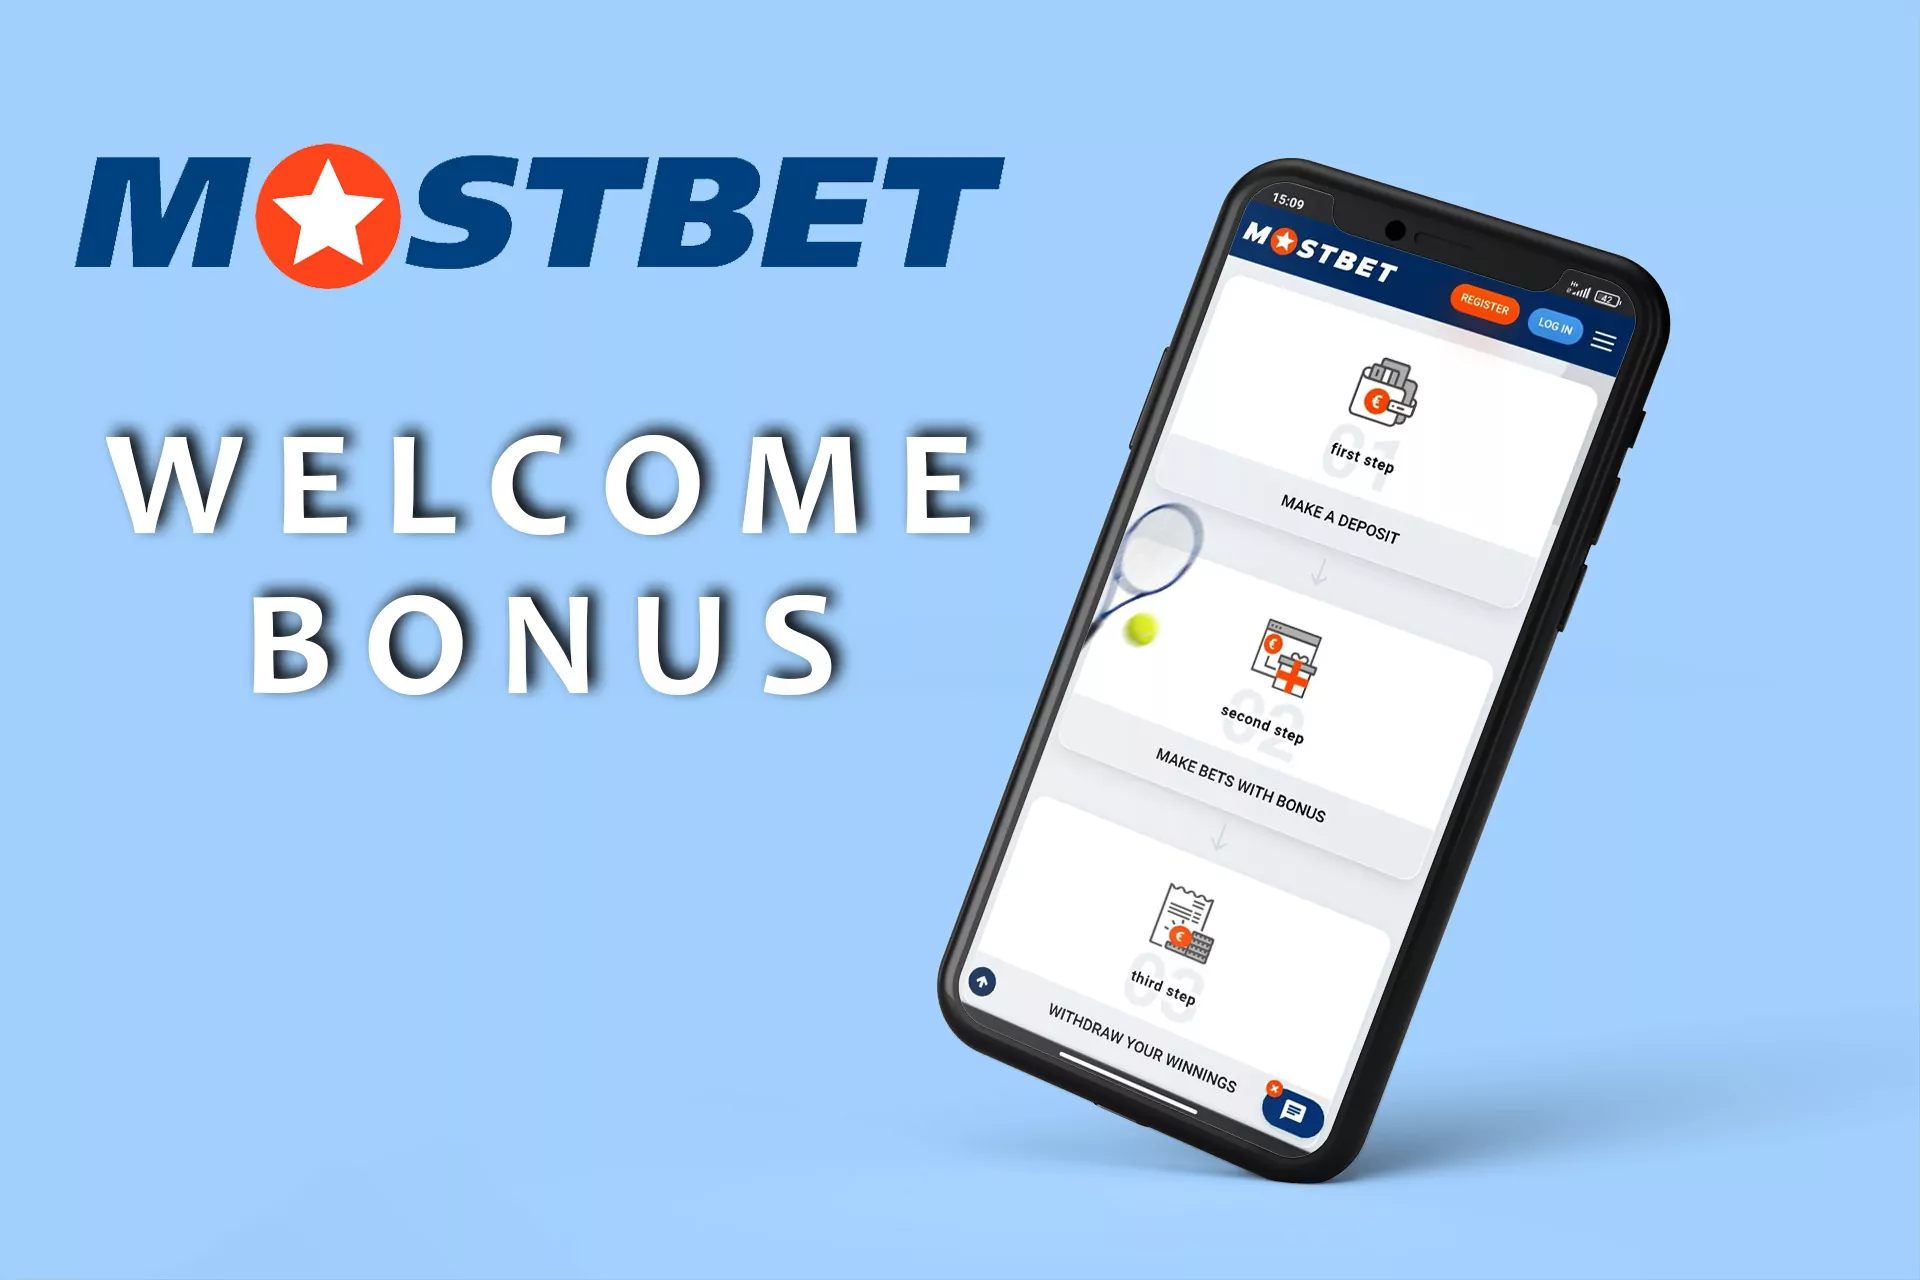 Mostbet app offers the same welcome bonus of 100% to the first deposit.